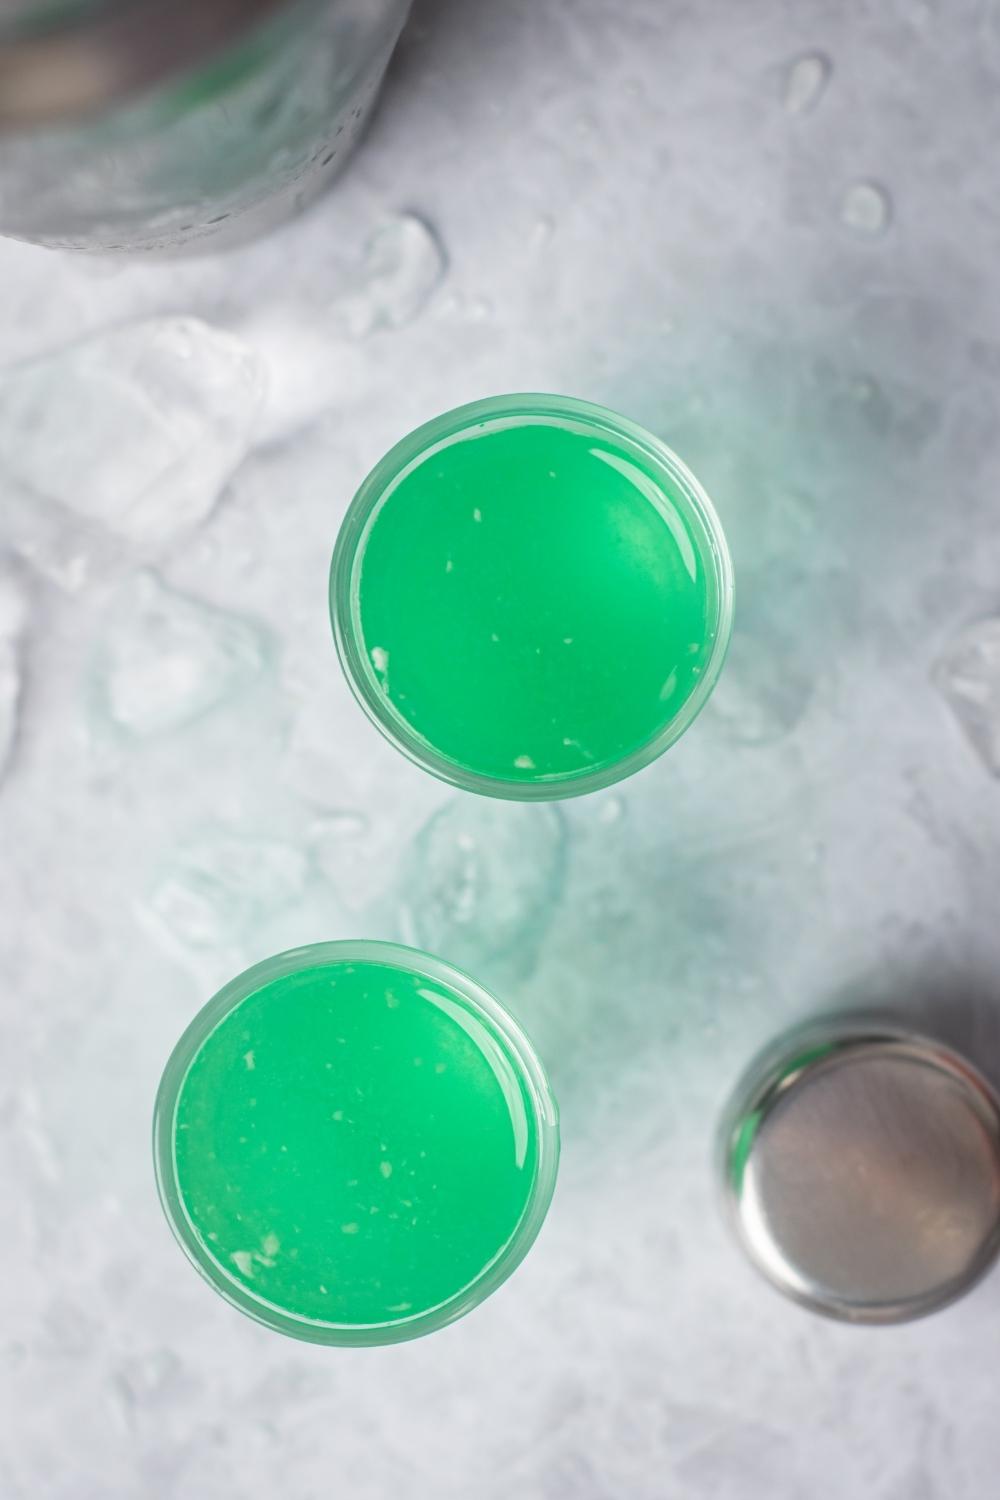 An overhead view of two marijuana shots in shot glasses. Ice is on the countertop surrounding the glasses.